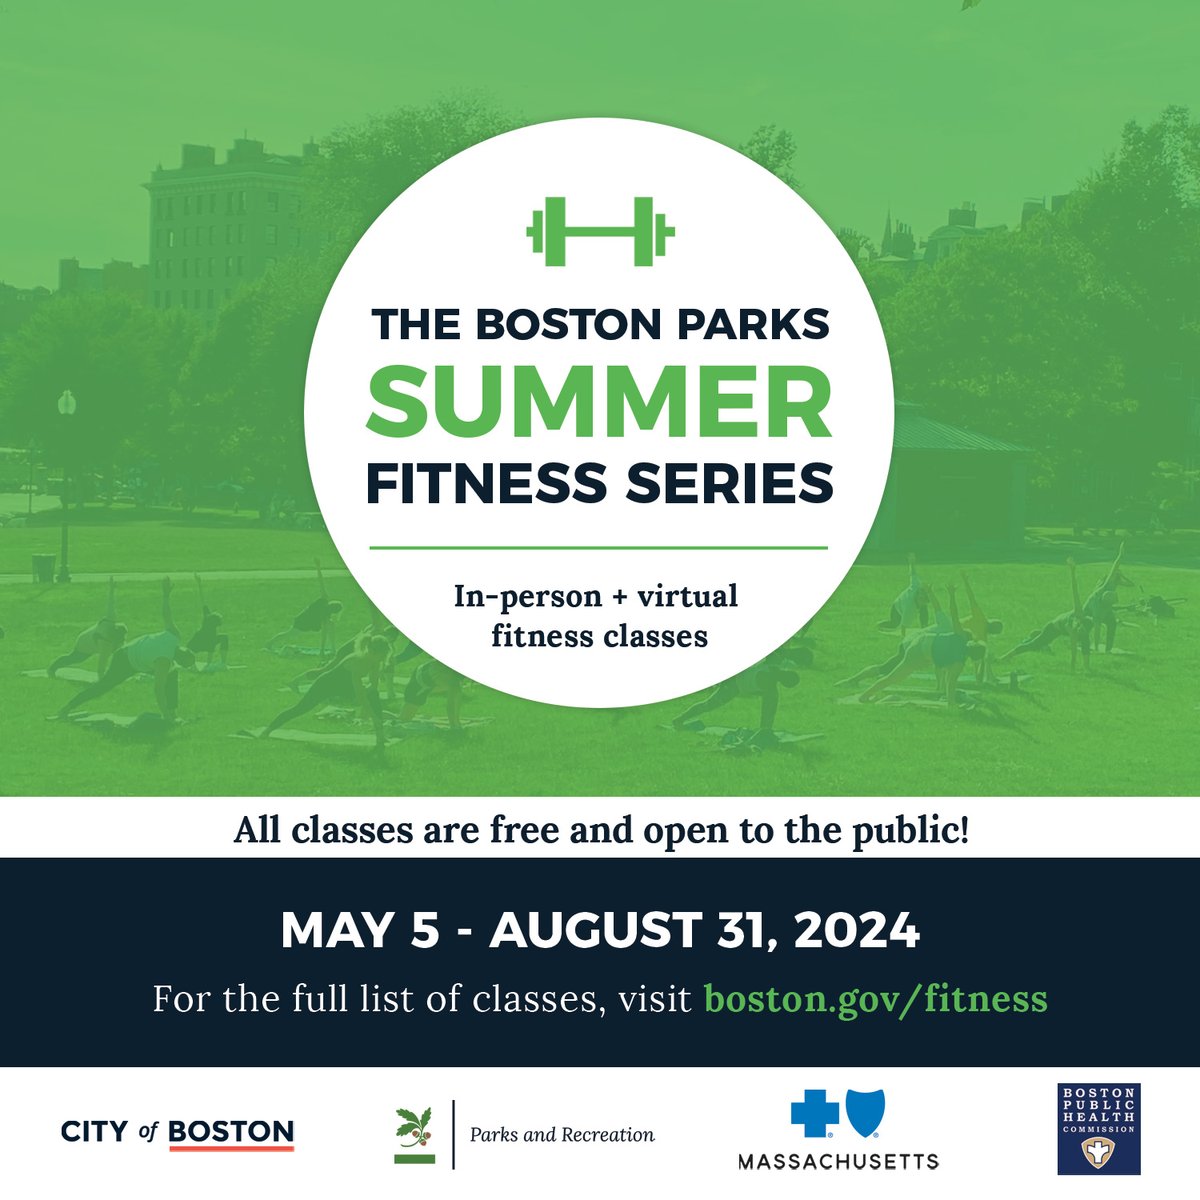 Parks Summer Fitness is back! In-person and virtual classes will keep Boston moving all summer long! All classes are free and open to the public. boston.gov/fitness